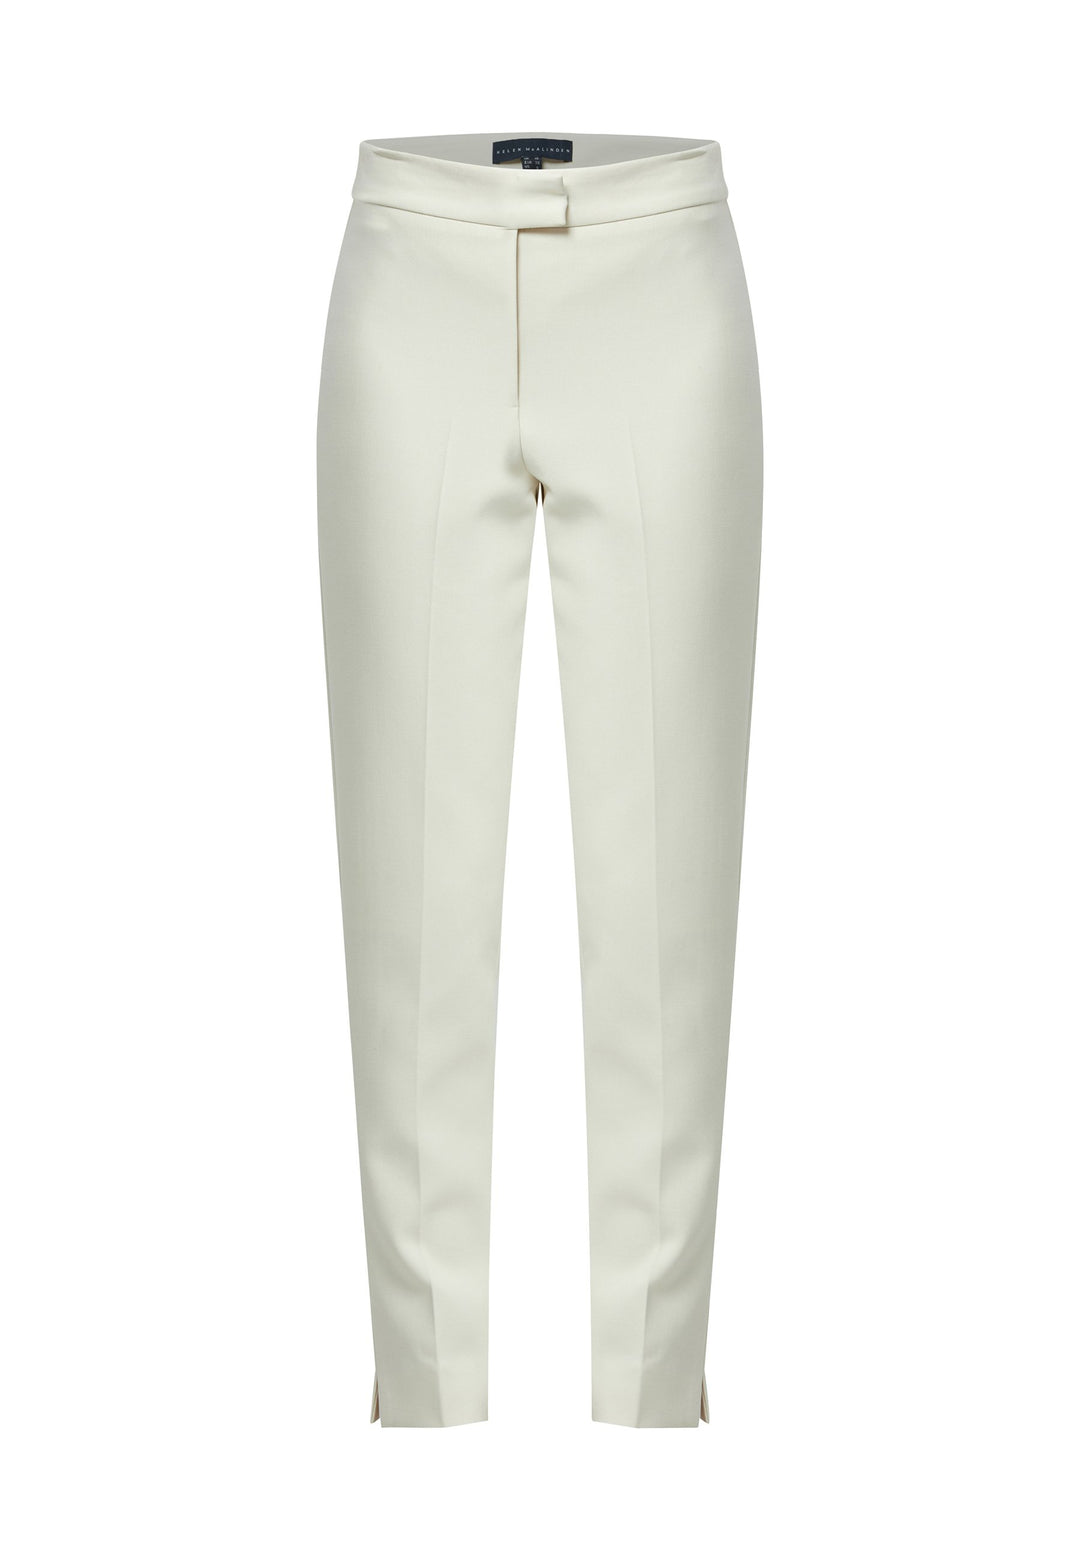 Jill returns in a refined ivory shade, pairing seamlessly with the Darcie Ivory Jacket. These classic narrow-leg trousers boast a sleek, tailored silhouette, ankle-grazing length, and a clean flat front that sits naturally on the waist, exuding sophistication. Featuring subtle yet stylish touches like a jeet pocket at the back and a slit hem, Jill epitomizes timeless elegance in pristine ivory.